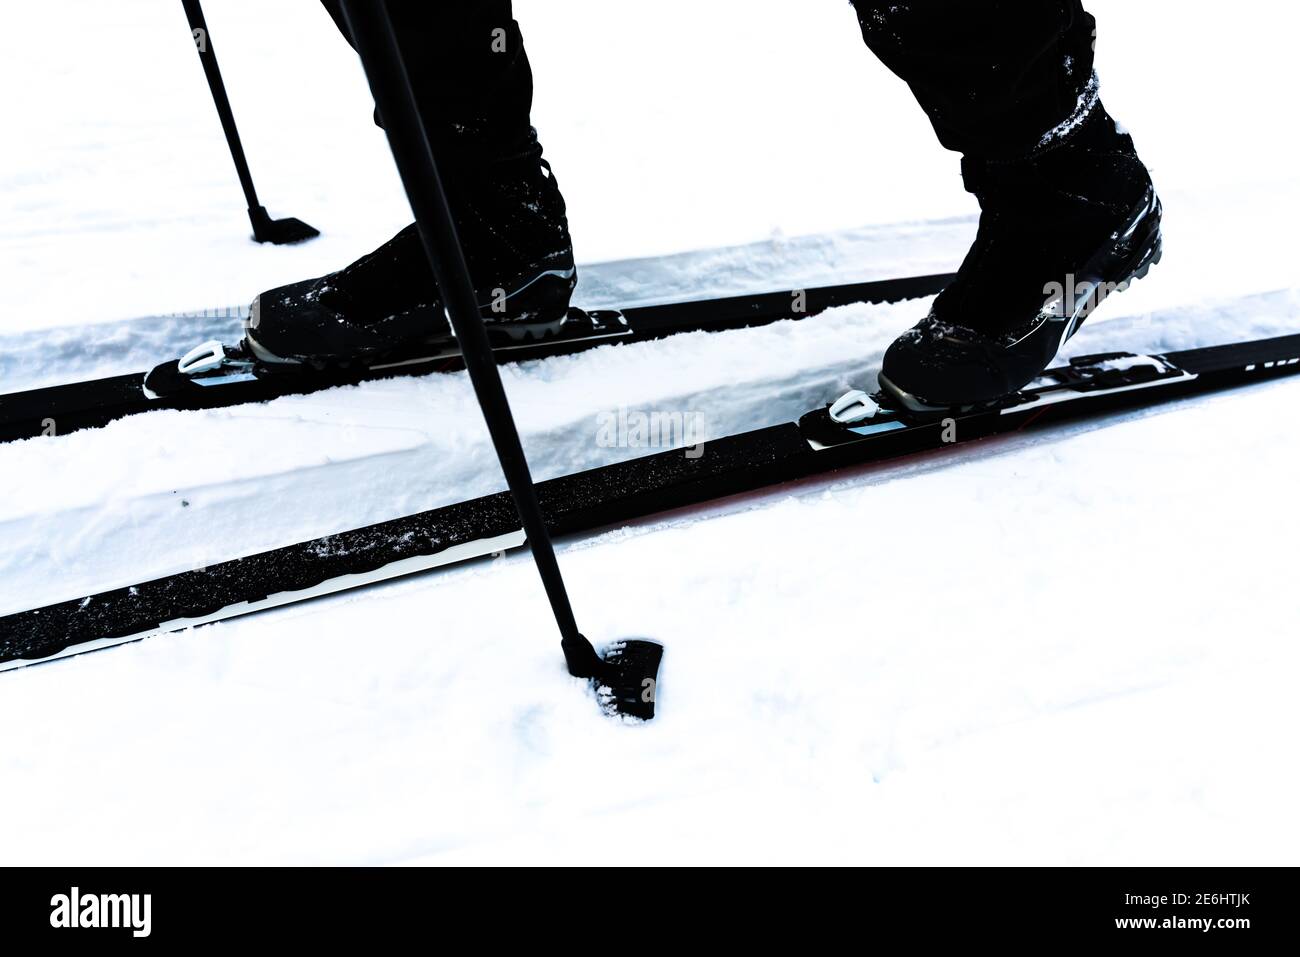 Cross-country skiing boots, poles and skis, close up image. Stock Photo